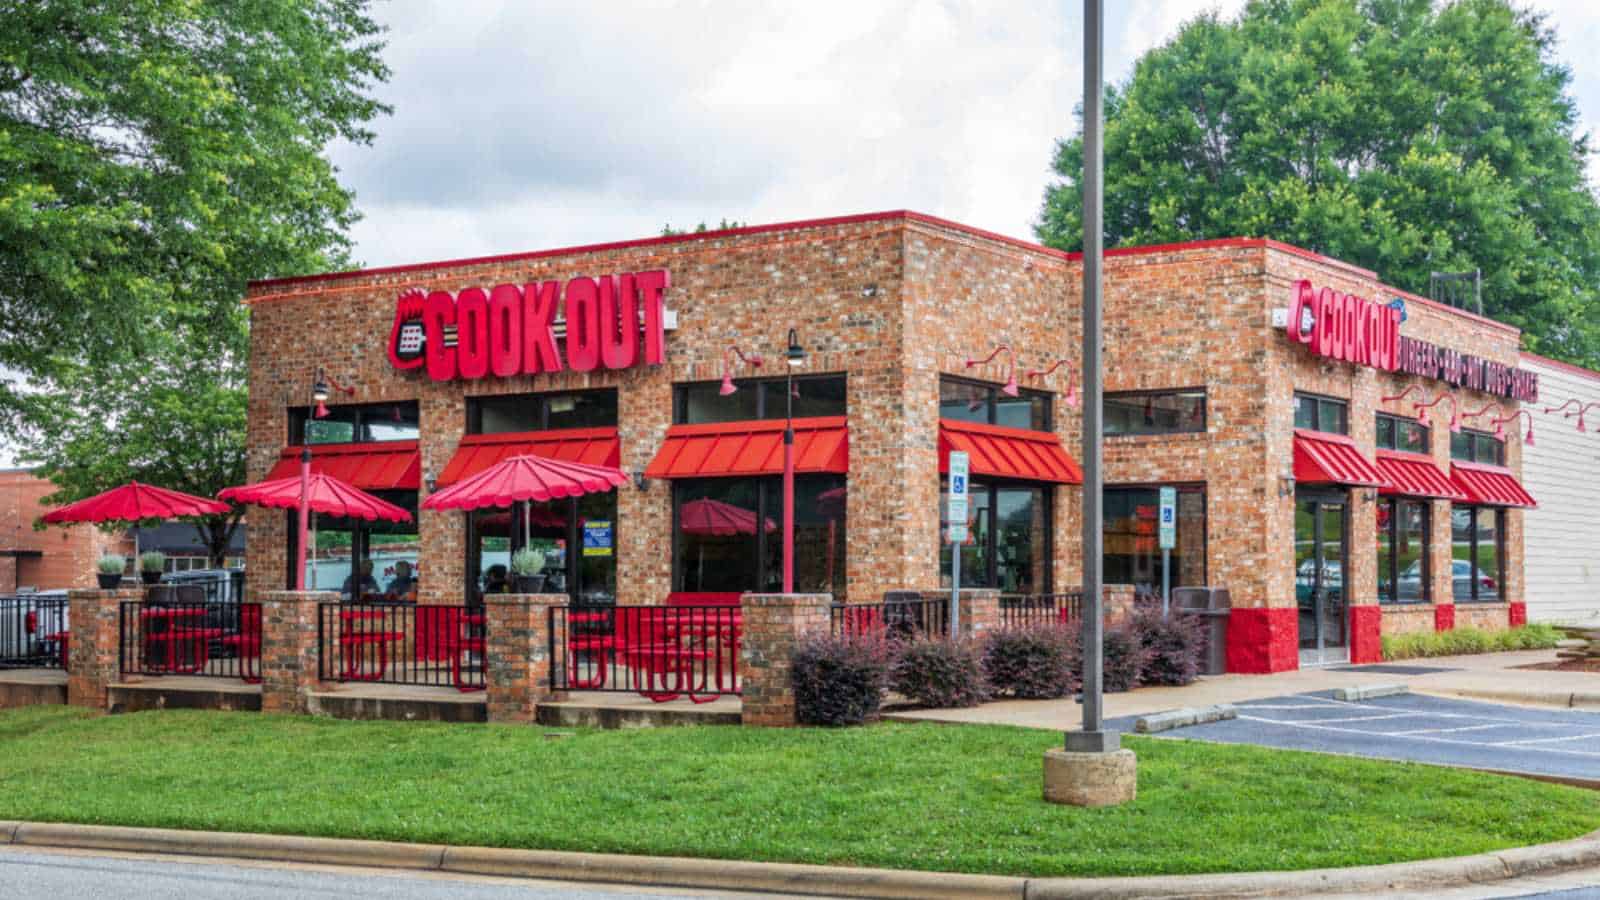 STATESVILLE, NC, USA-JUNE 19, 2019: A Cook Out restaurant, a privately-owned fast food chain located primarily in southeast USA.
